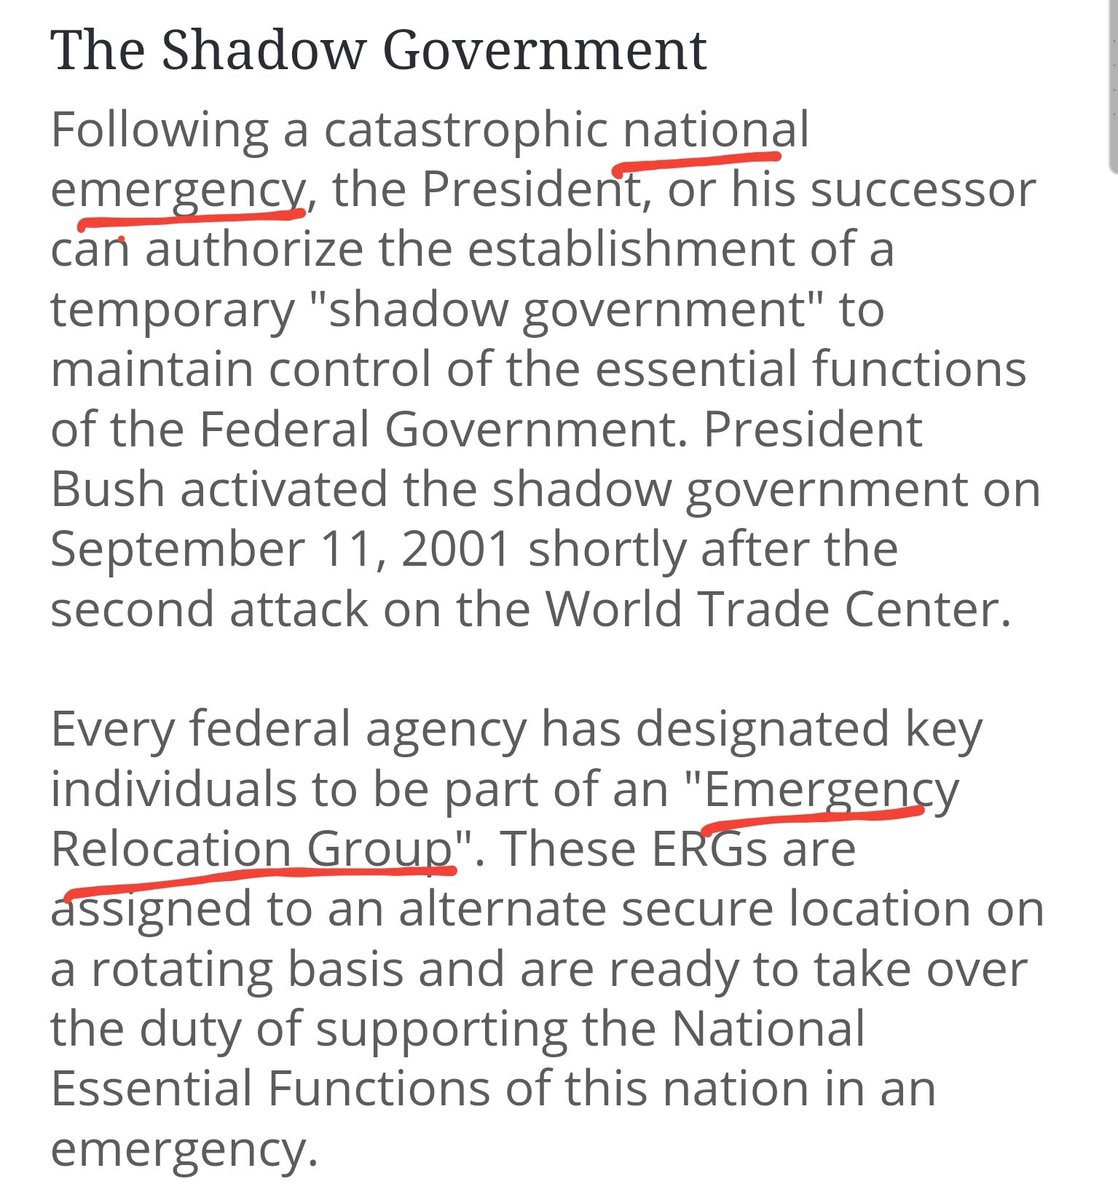 4)During a "catastrophic national emergency" the President may establish a temporary Shadow Government.Part of establishing the Shadow Government requires key individuals in the ERG (Emergency Relocation Group) moving to secondary locations to run the Government